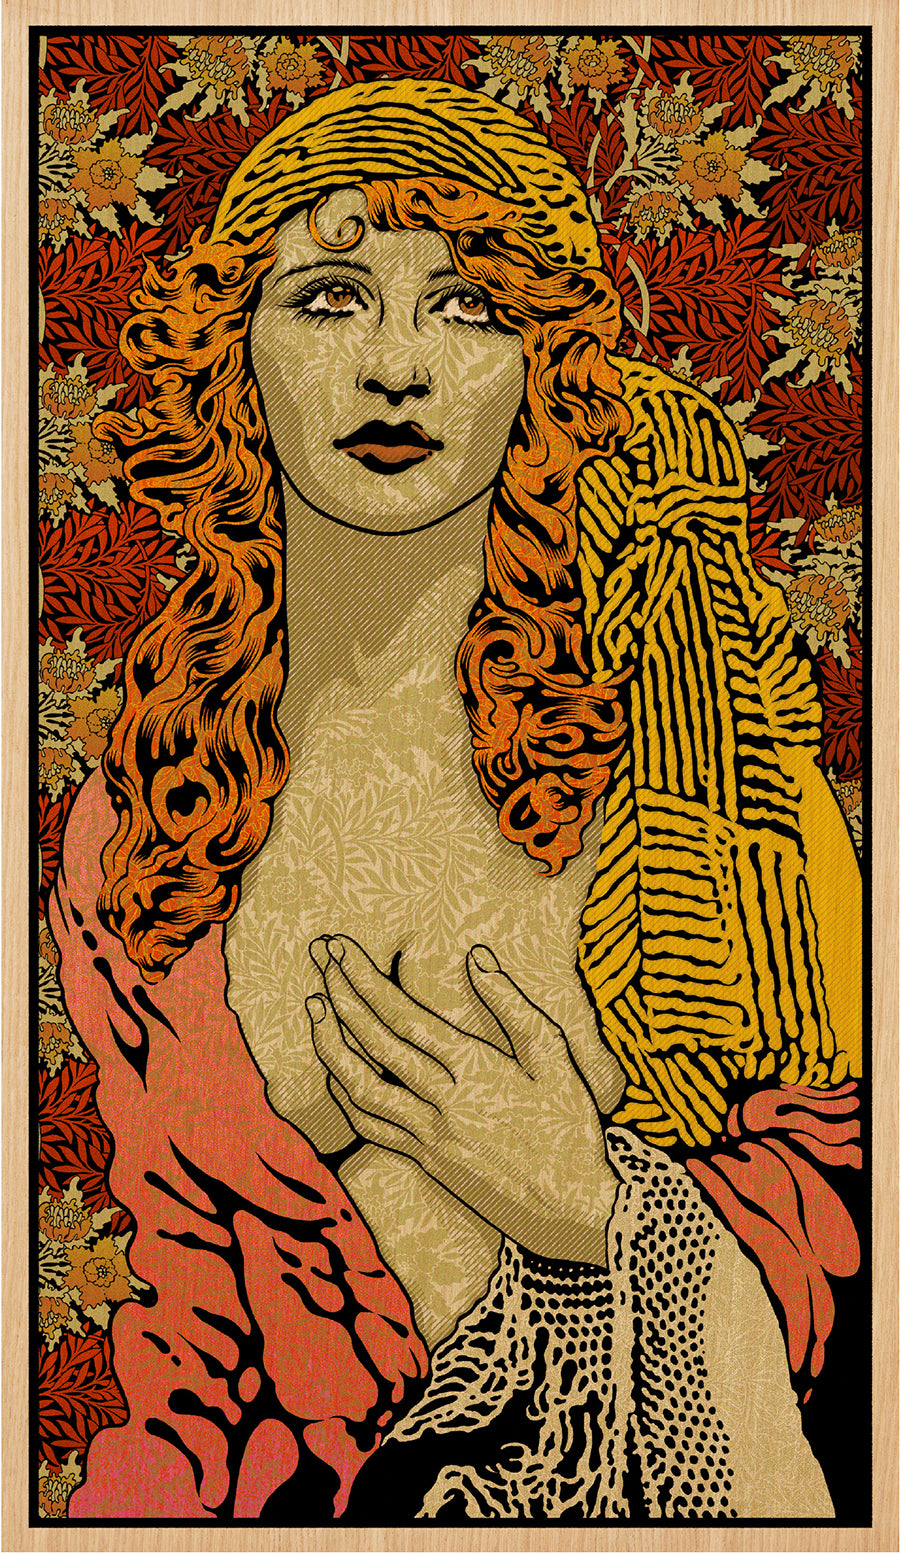  by Chuck Sperry titled Chuck Sperry - "Magdalena" Wood Panel Print